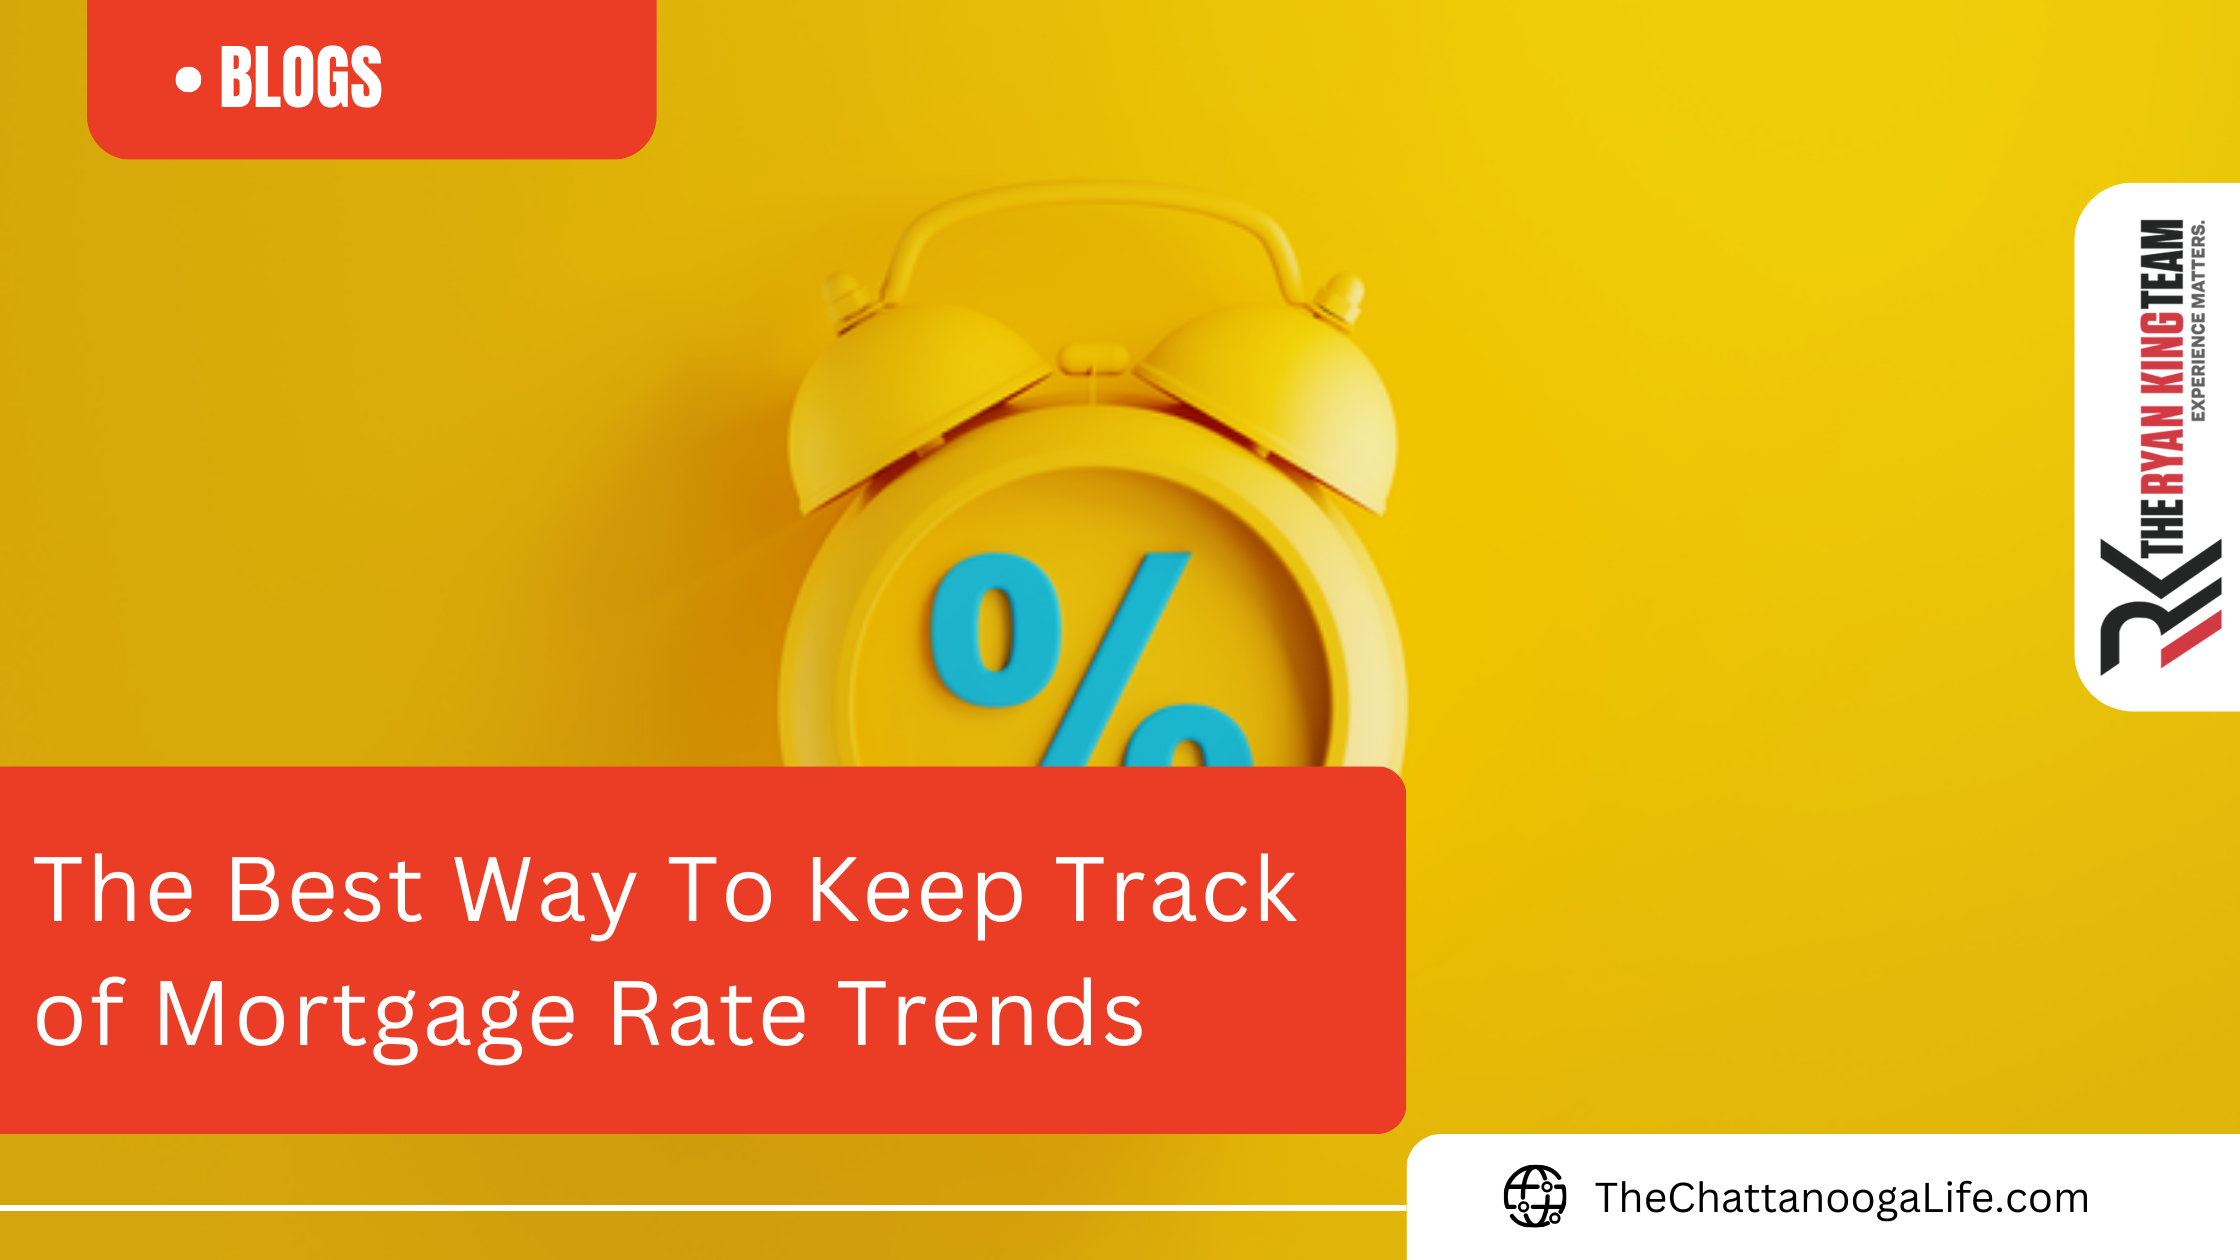 The Best Way To Keep Track of Mortgage Rate Trends